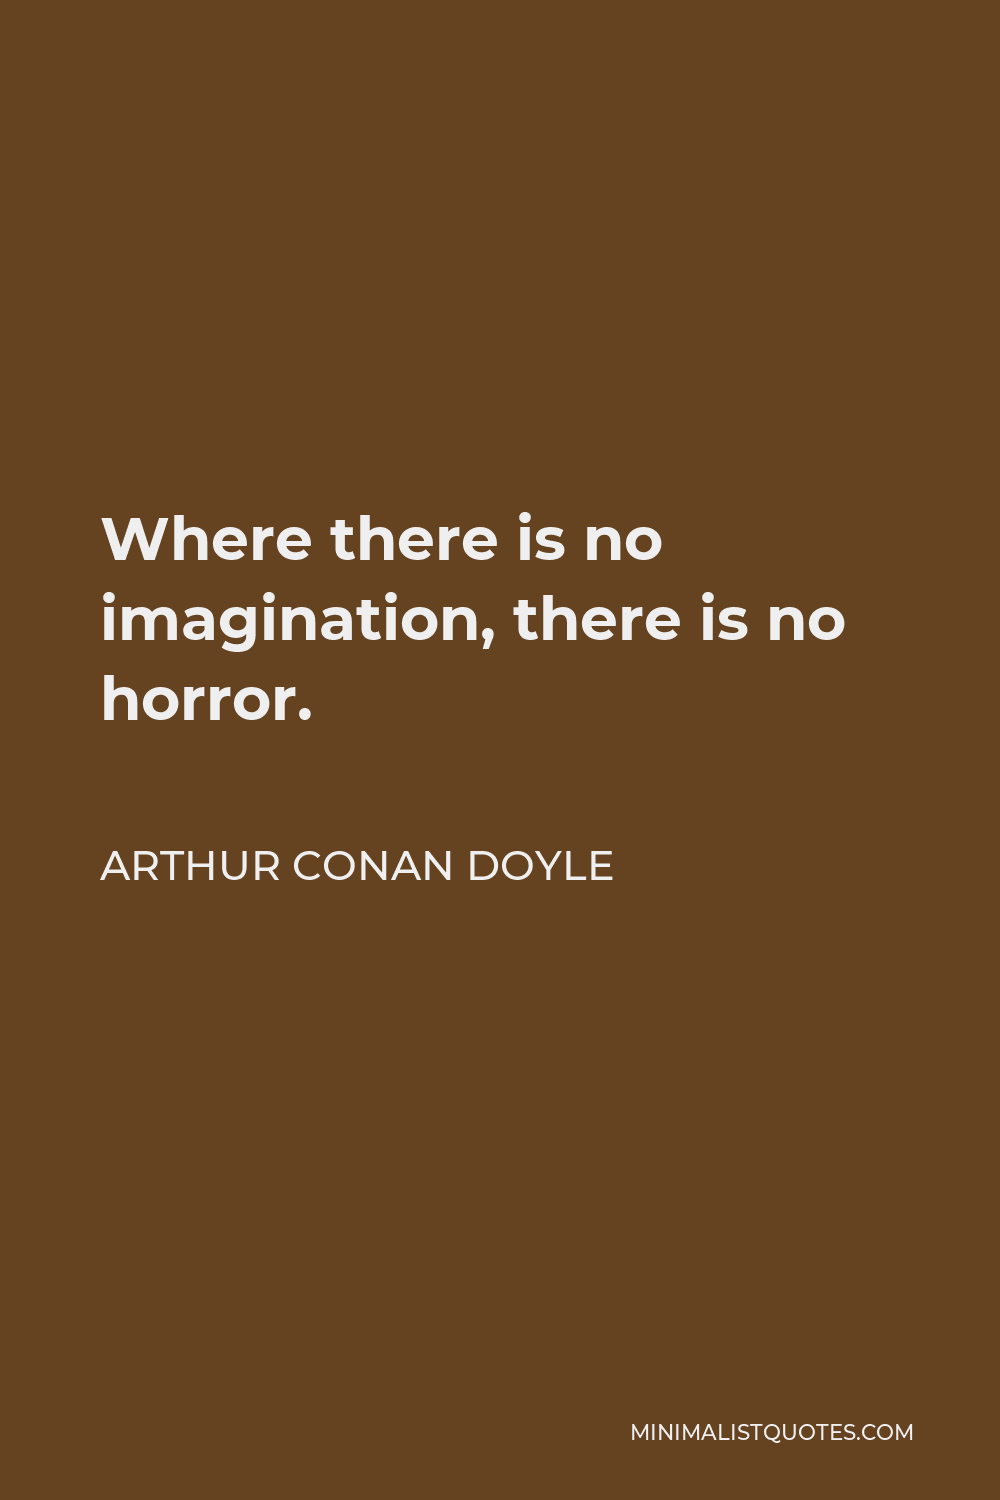 Arthur Conan Doyle Quote - Where there is no imagination, there is no horror.